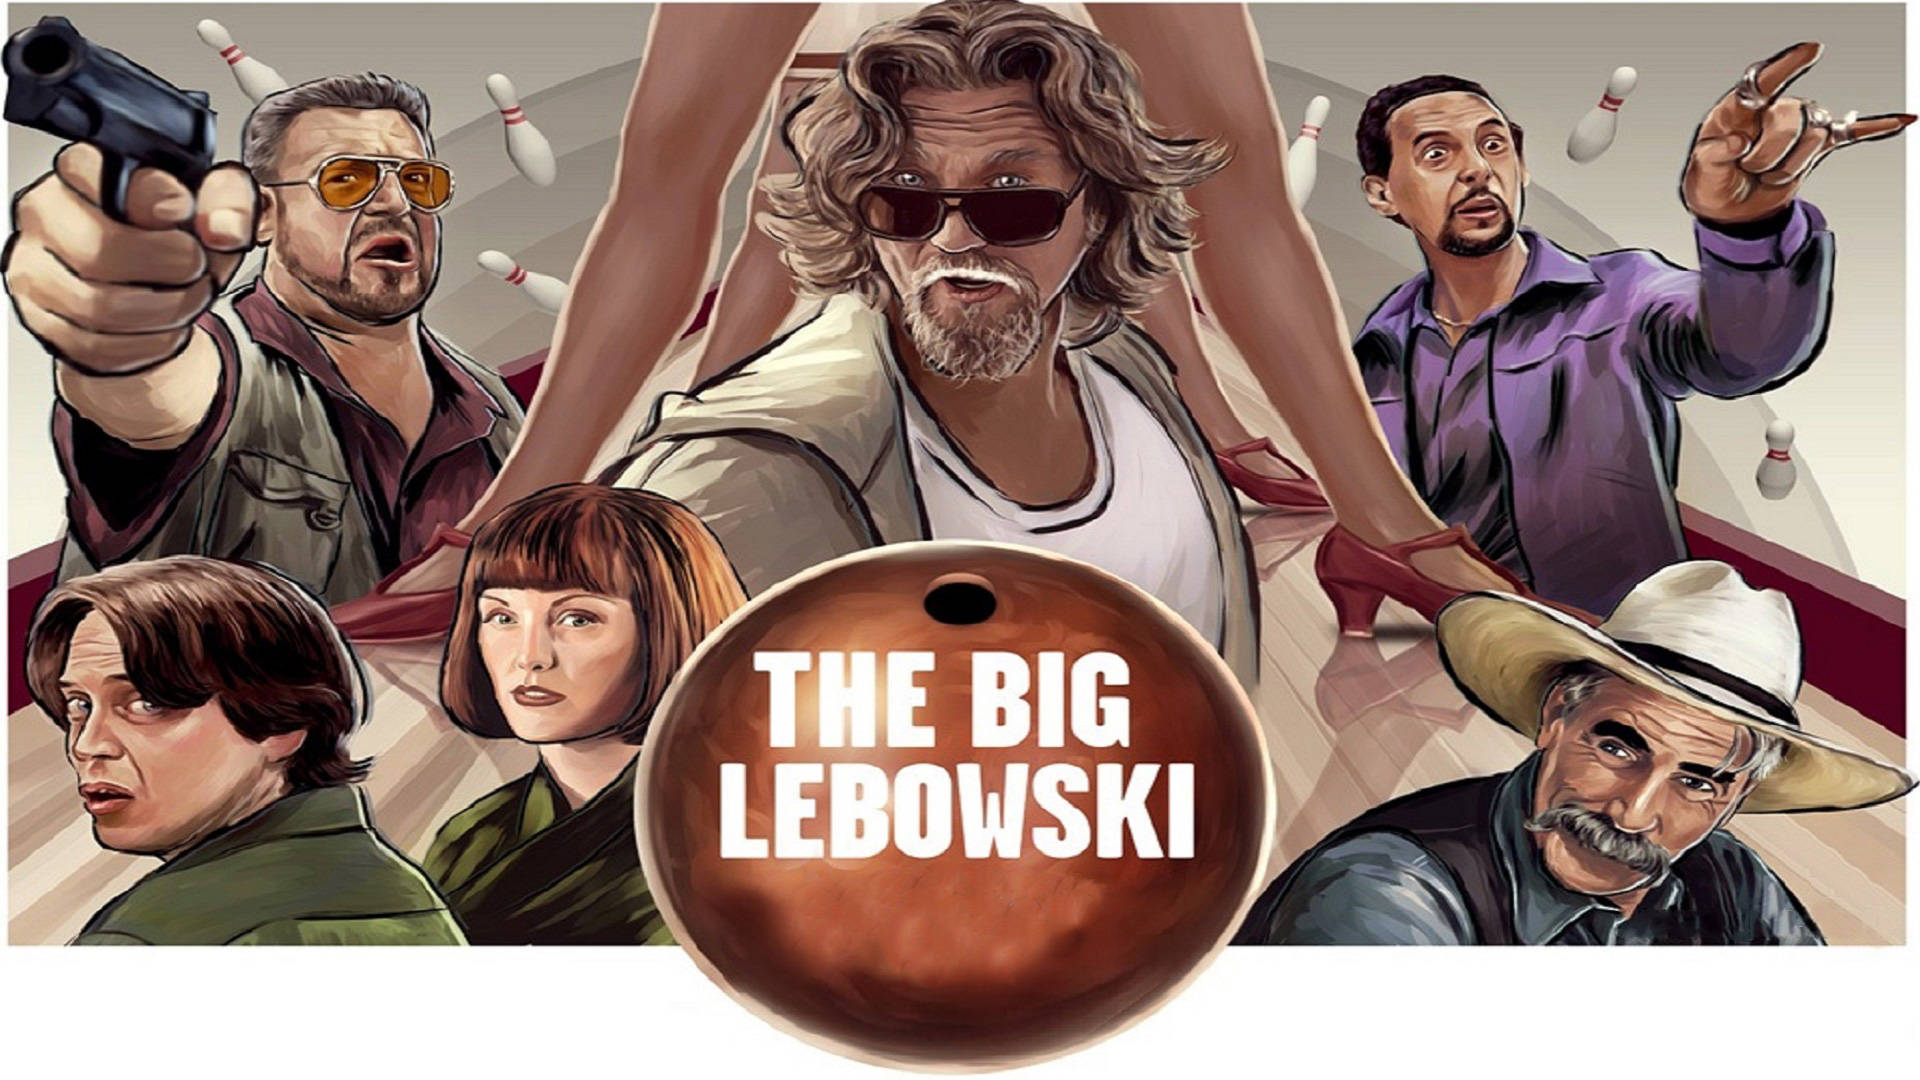 The Dude From The Big Lebowski Movie Illustration Art